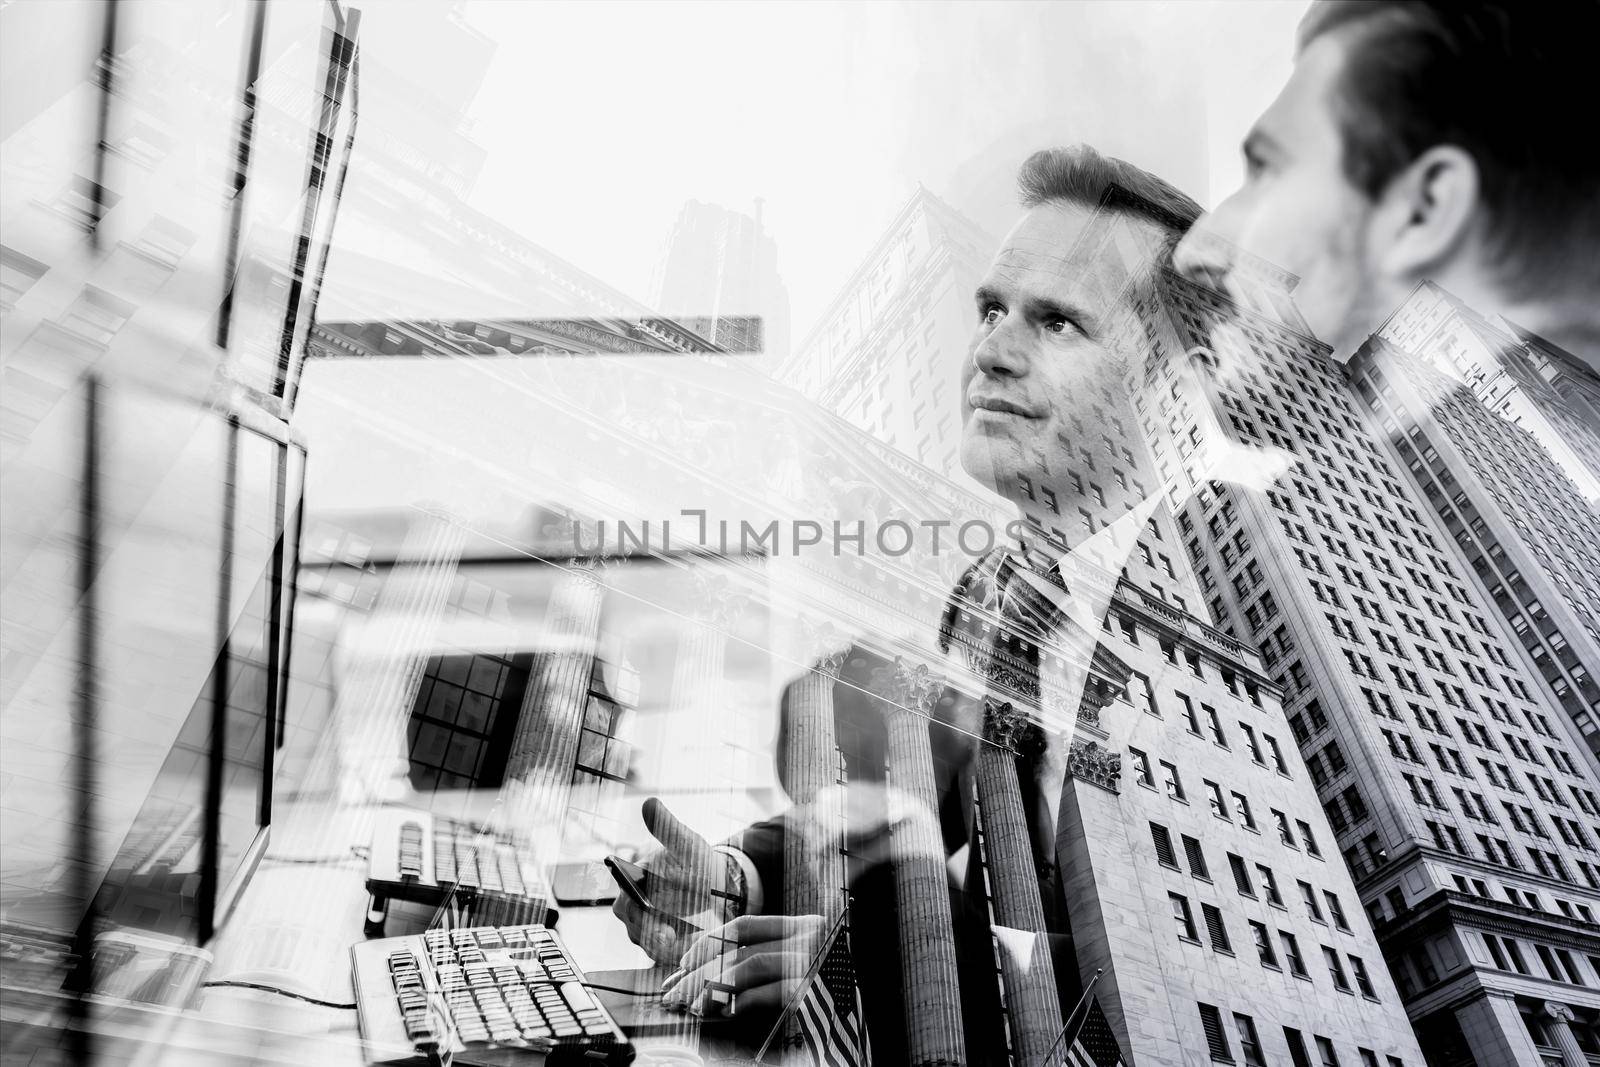 Corporate business, finance, stock market and economic prosperity conceptul collage. Wall street brokers and wealth managers against new york stock exchange reflection. Black and white image.